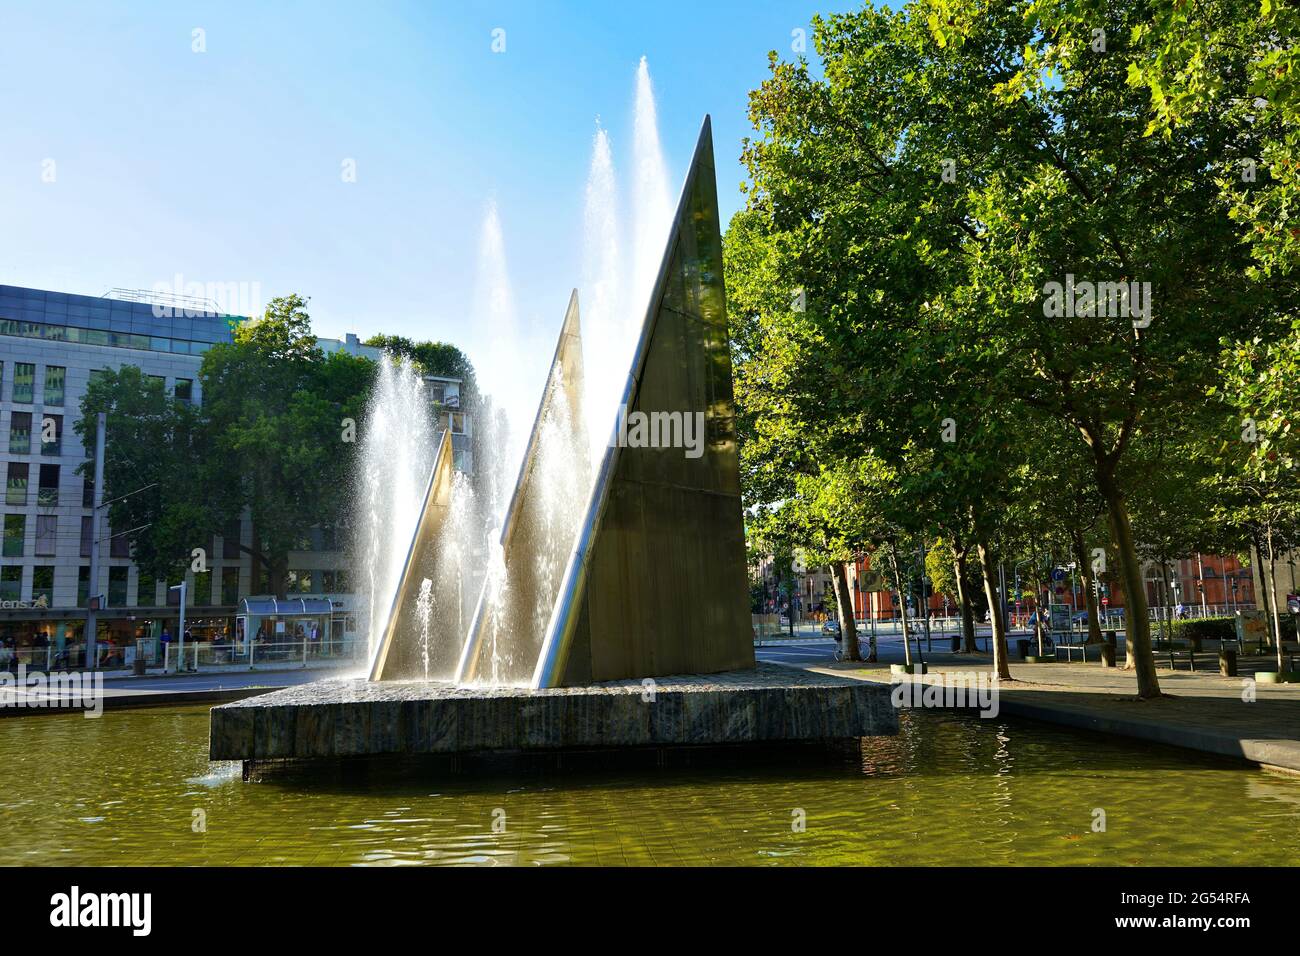 The Three Sail Fountain / Mack Fountain by sculptor Heinz Mack with glistening water in the backlight. It was constructed from 1986 - 1988. Stock Photo